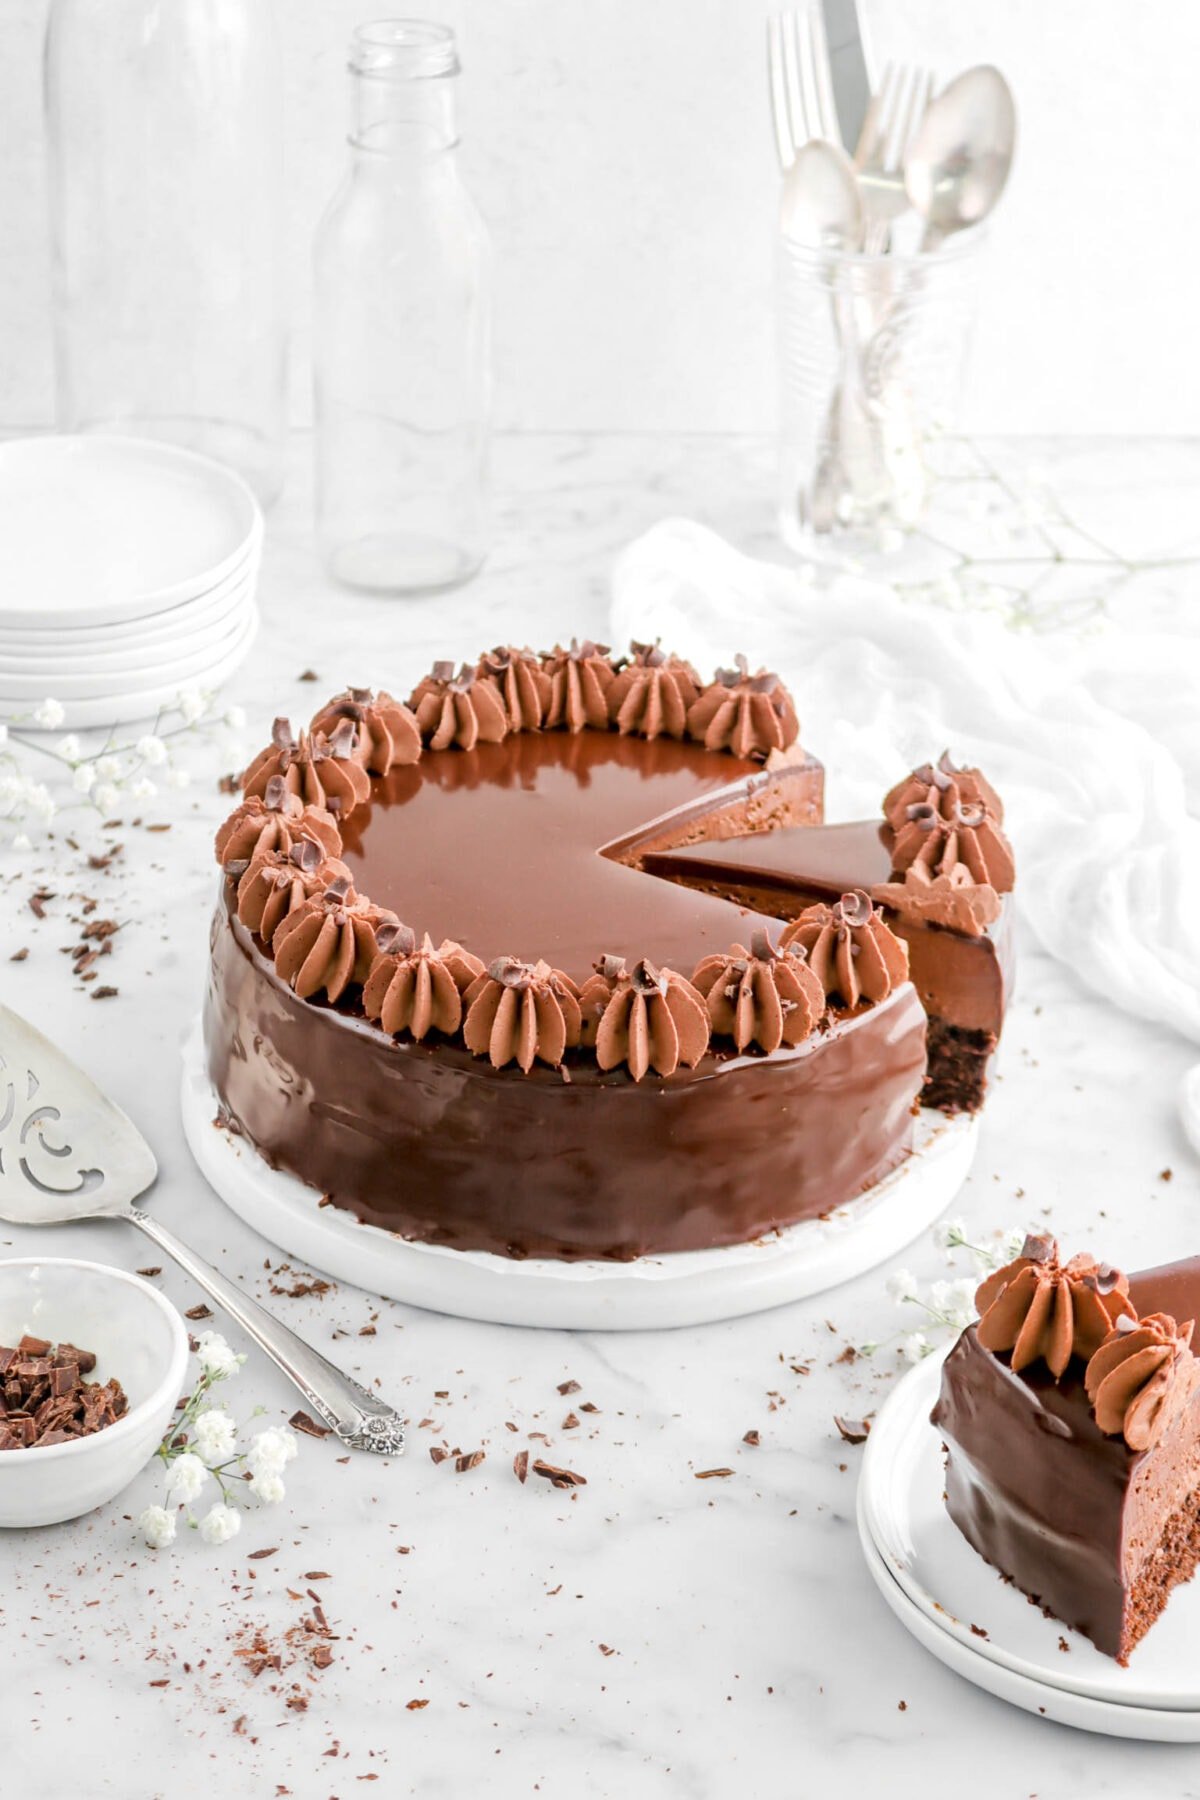 angled shot of sliced chocolate mousse cake with another slice beside on stack of two plates, a cake knife and bowl of chocolate curls beside, white flowers and cheese cloth behind.